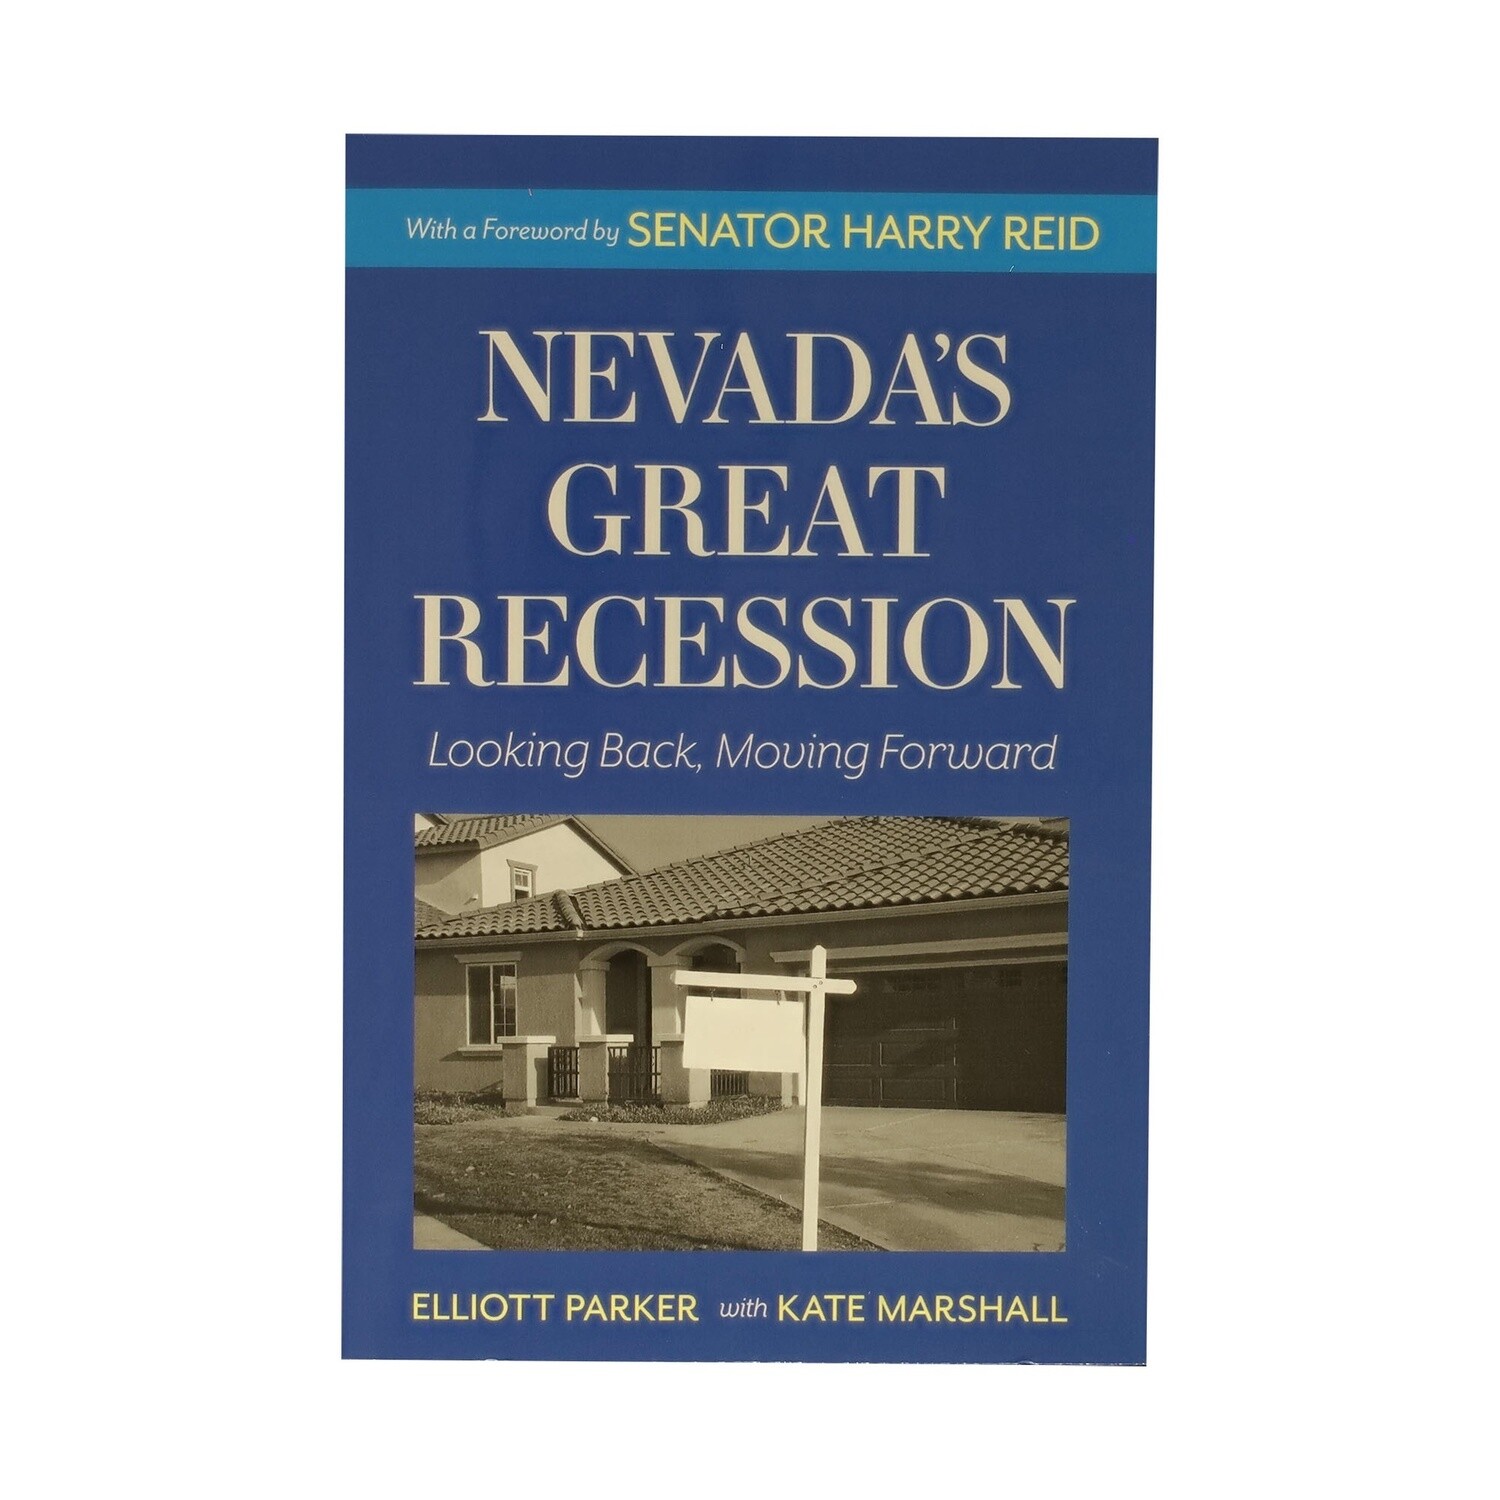 Nevada's Great Recession by Elliott Parker with Kate Marshall